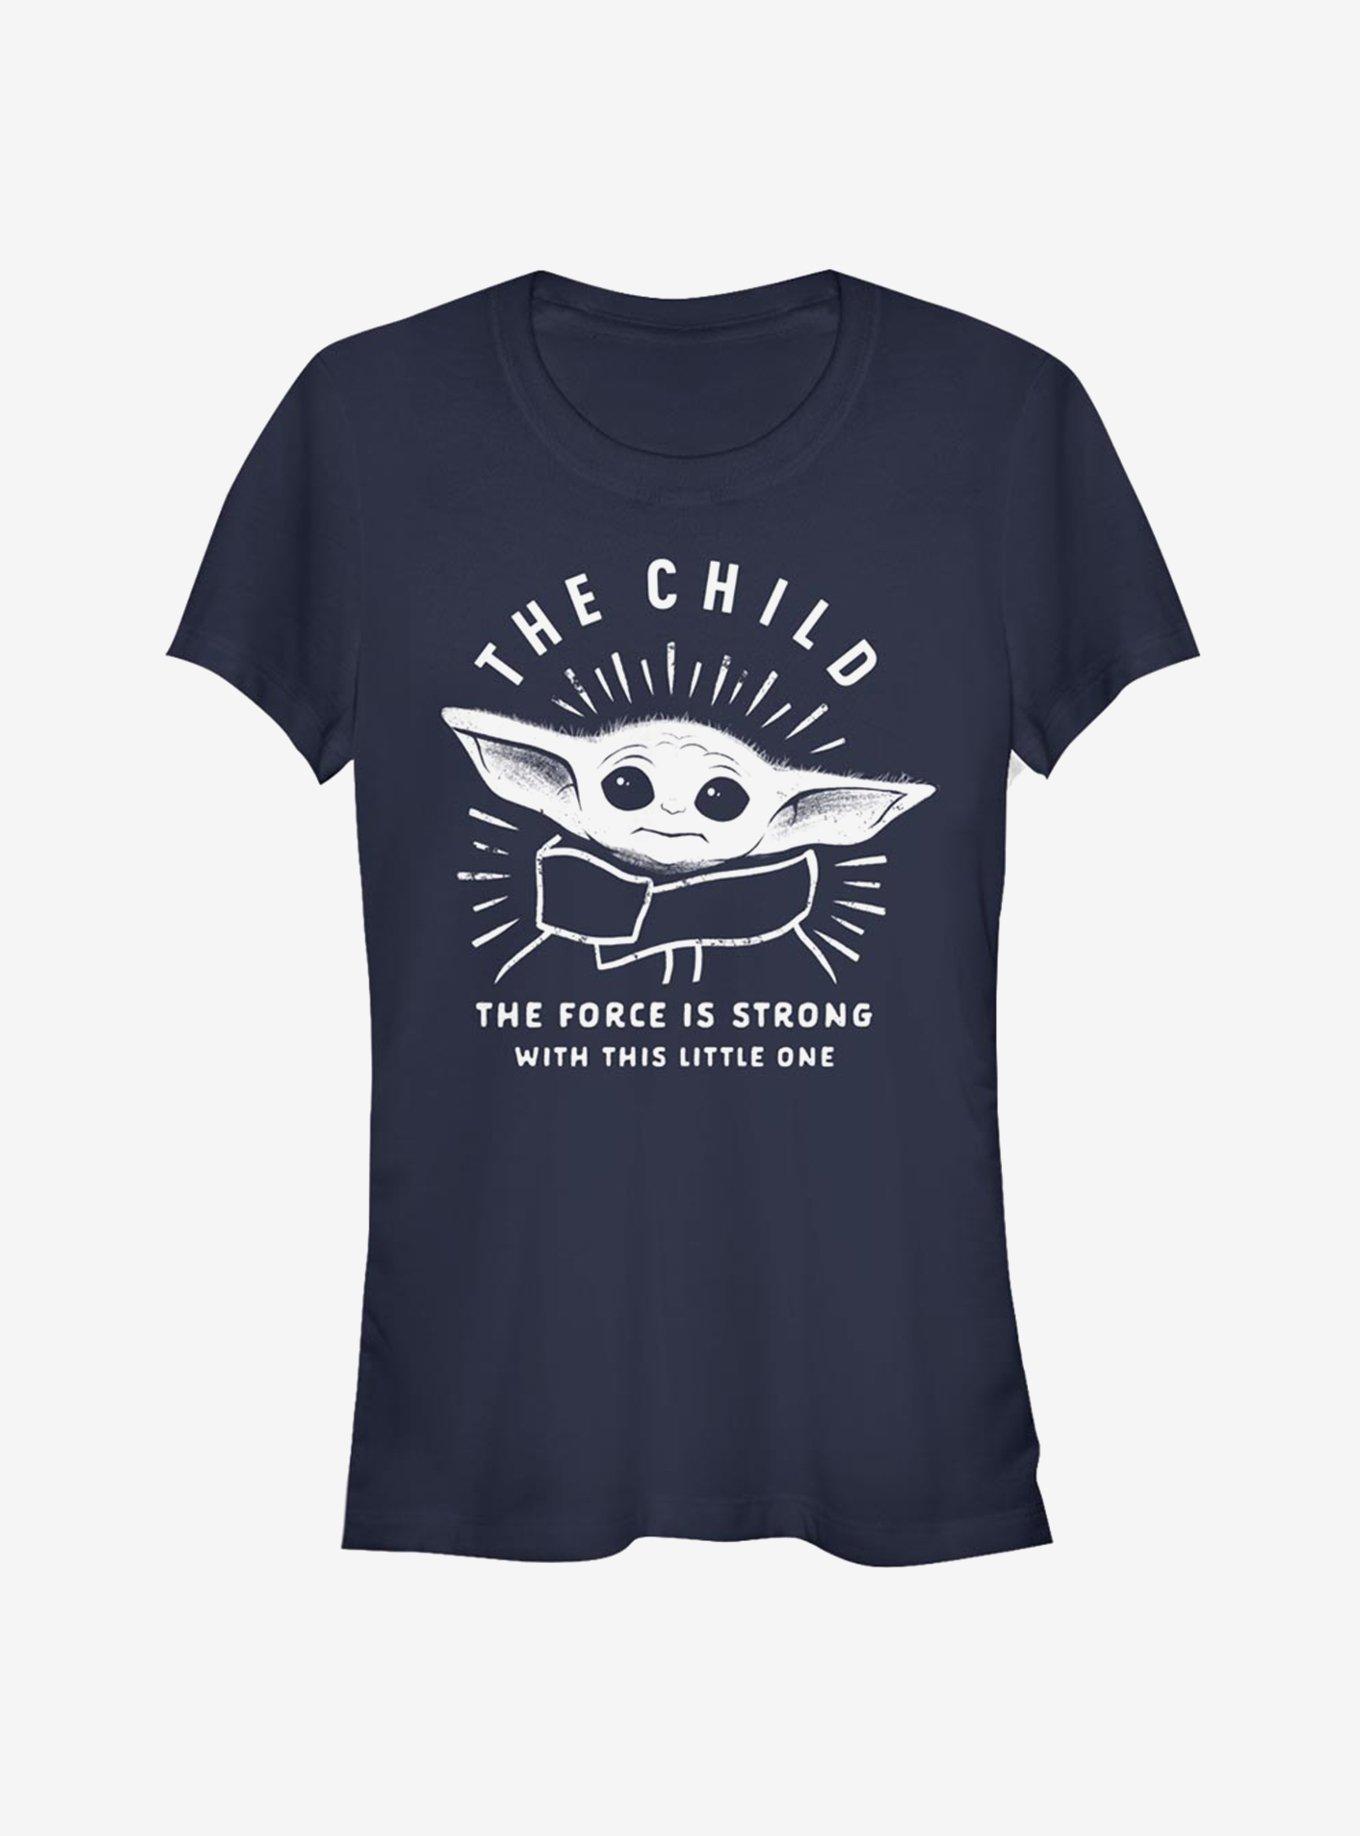 Star Wars The Mandalorian The Child The Force Is Strong Girls T-Shirt, NAVY, hi-res